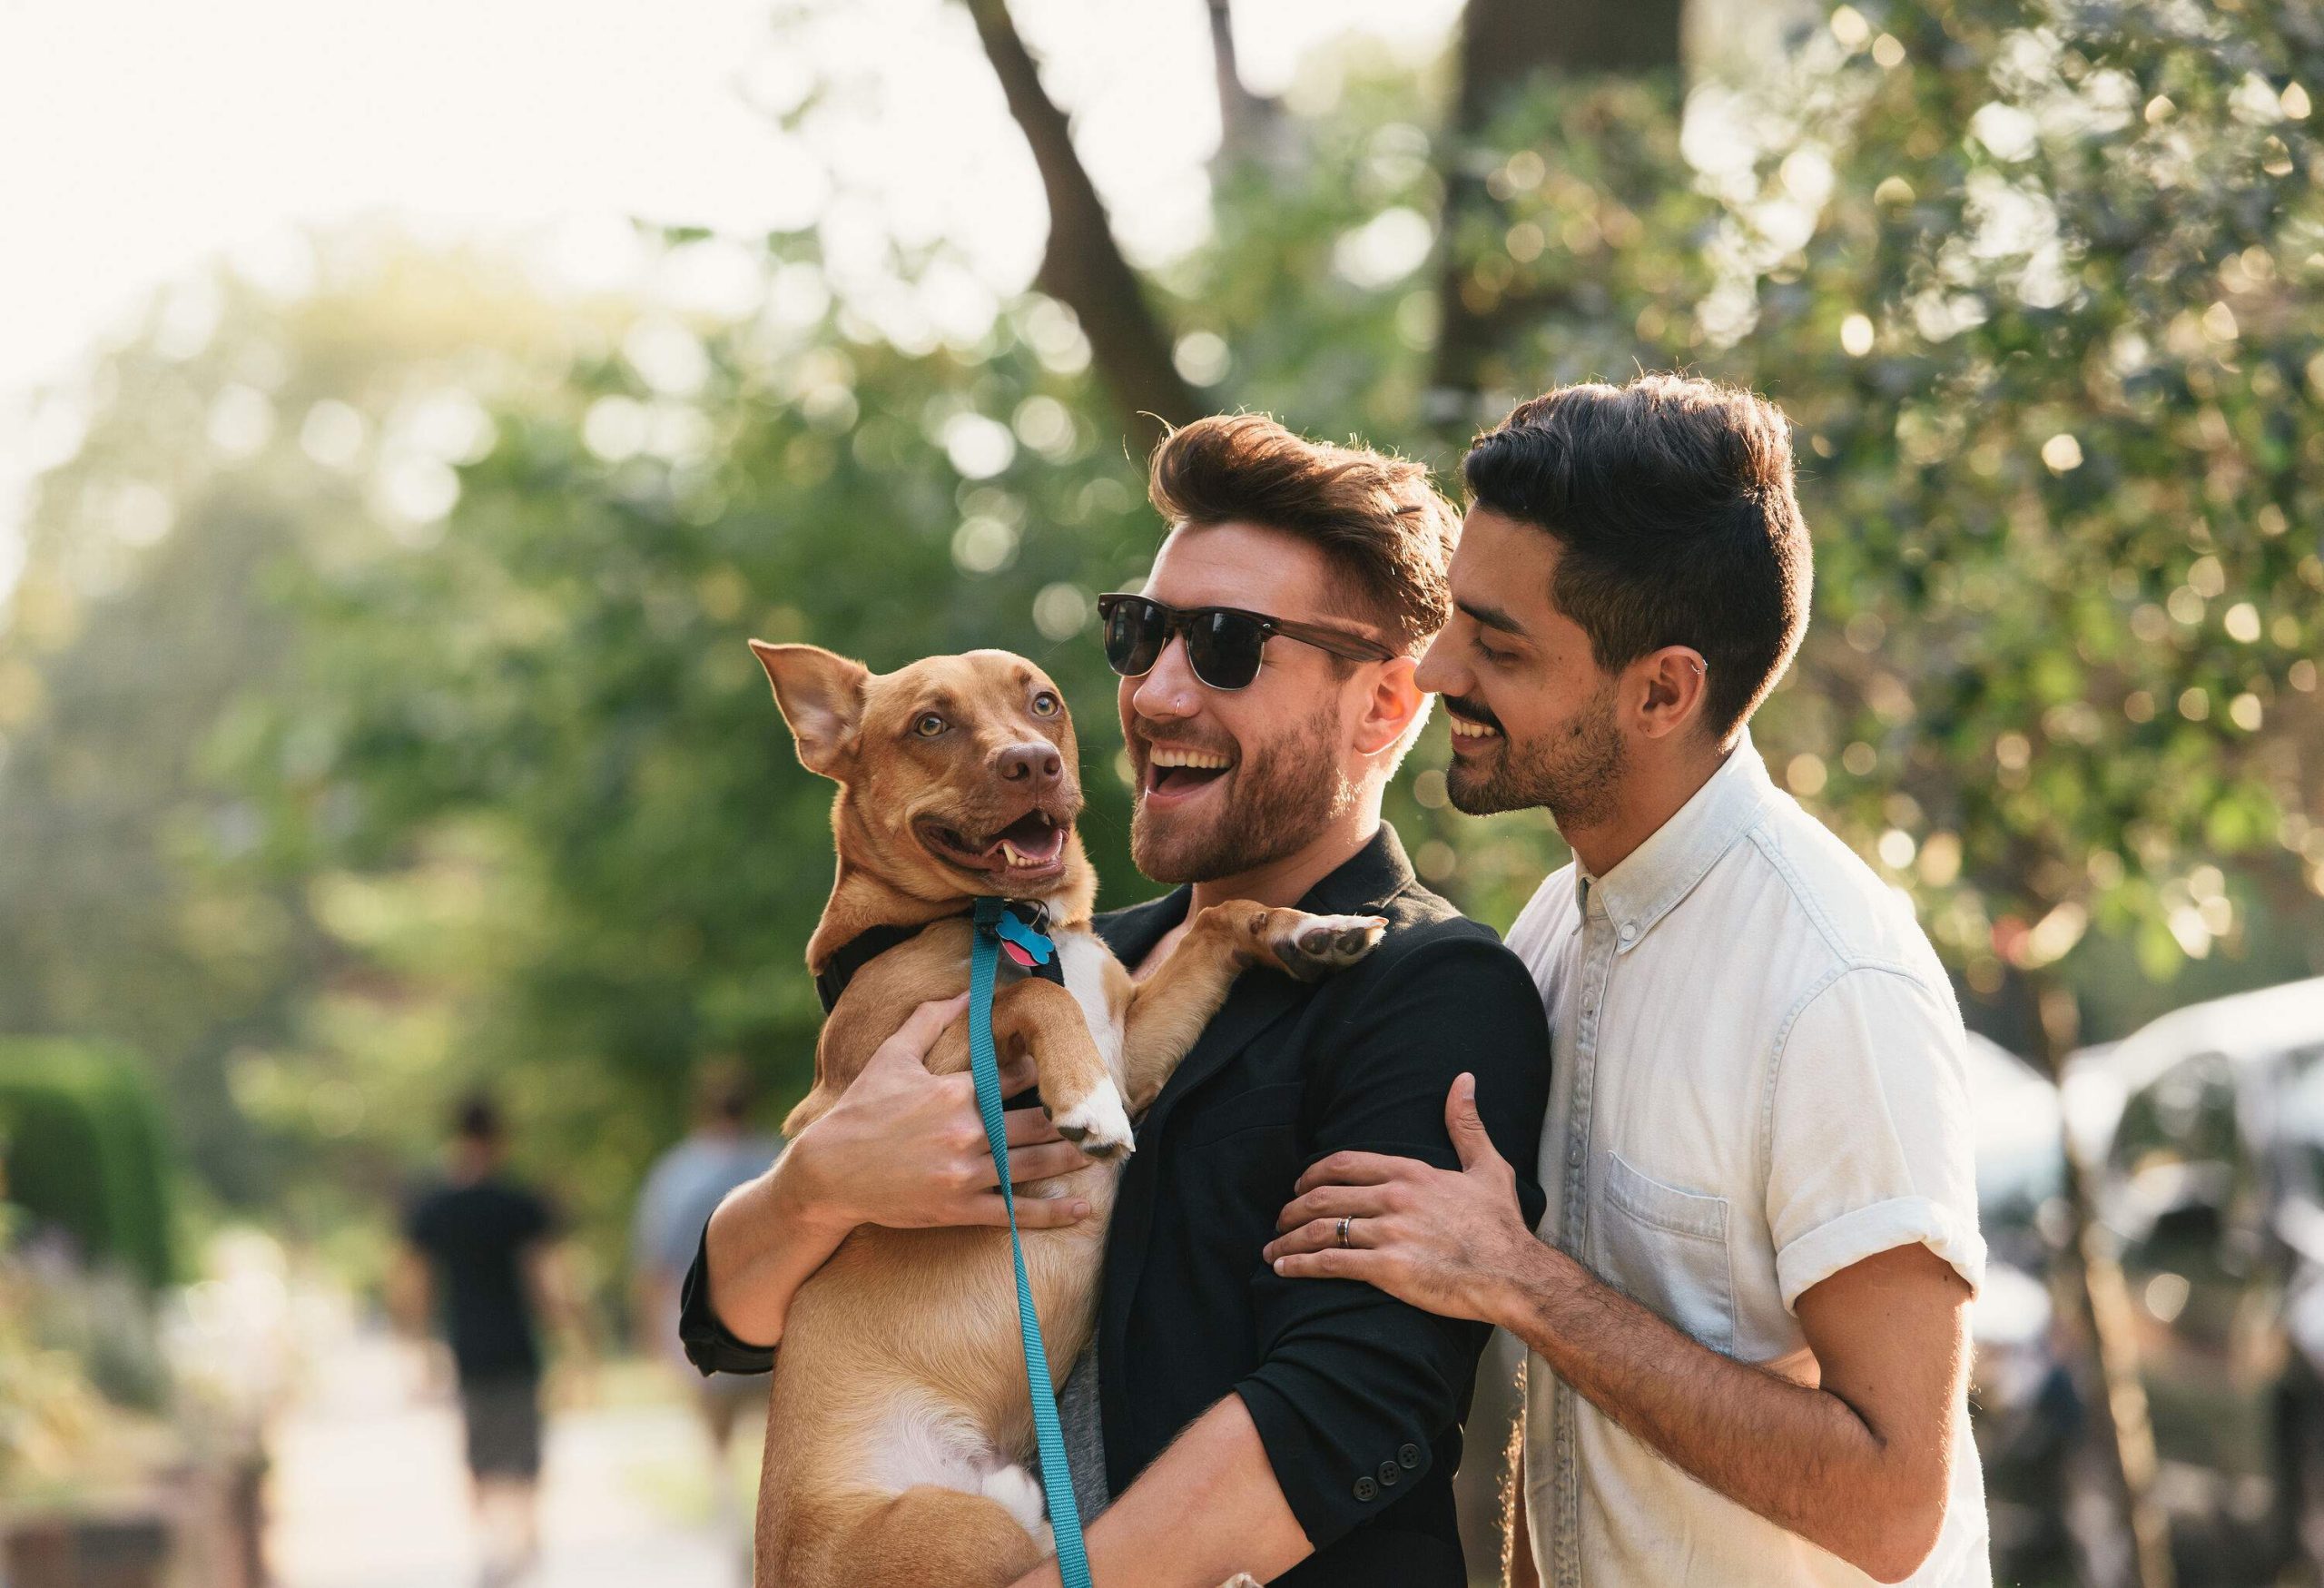 Happy male couple with one of the men carrying a dog.